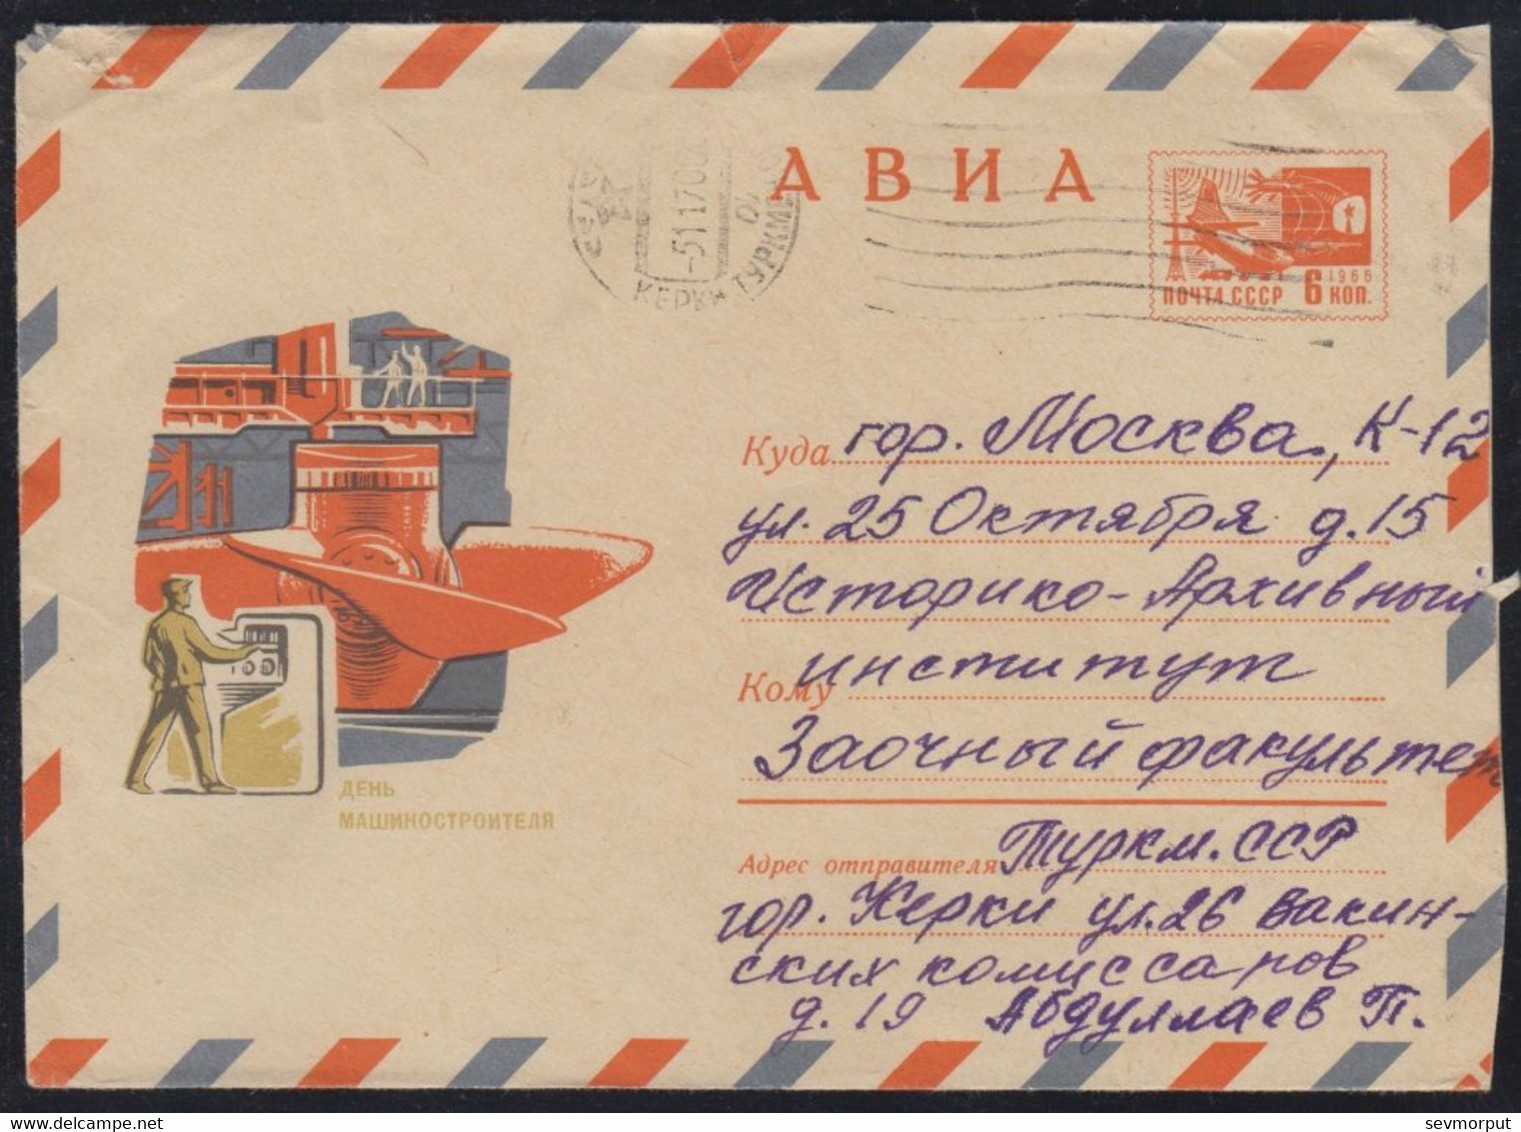 6470 RUSSIA 1969 ENTIER COVER Used HEAVY INDUSTRY INDUSTRIE COMPUTER TELECOM JOB WORK WORKER PROFESSION USSR Mailed 452 - 1960-69